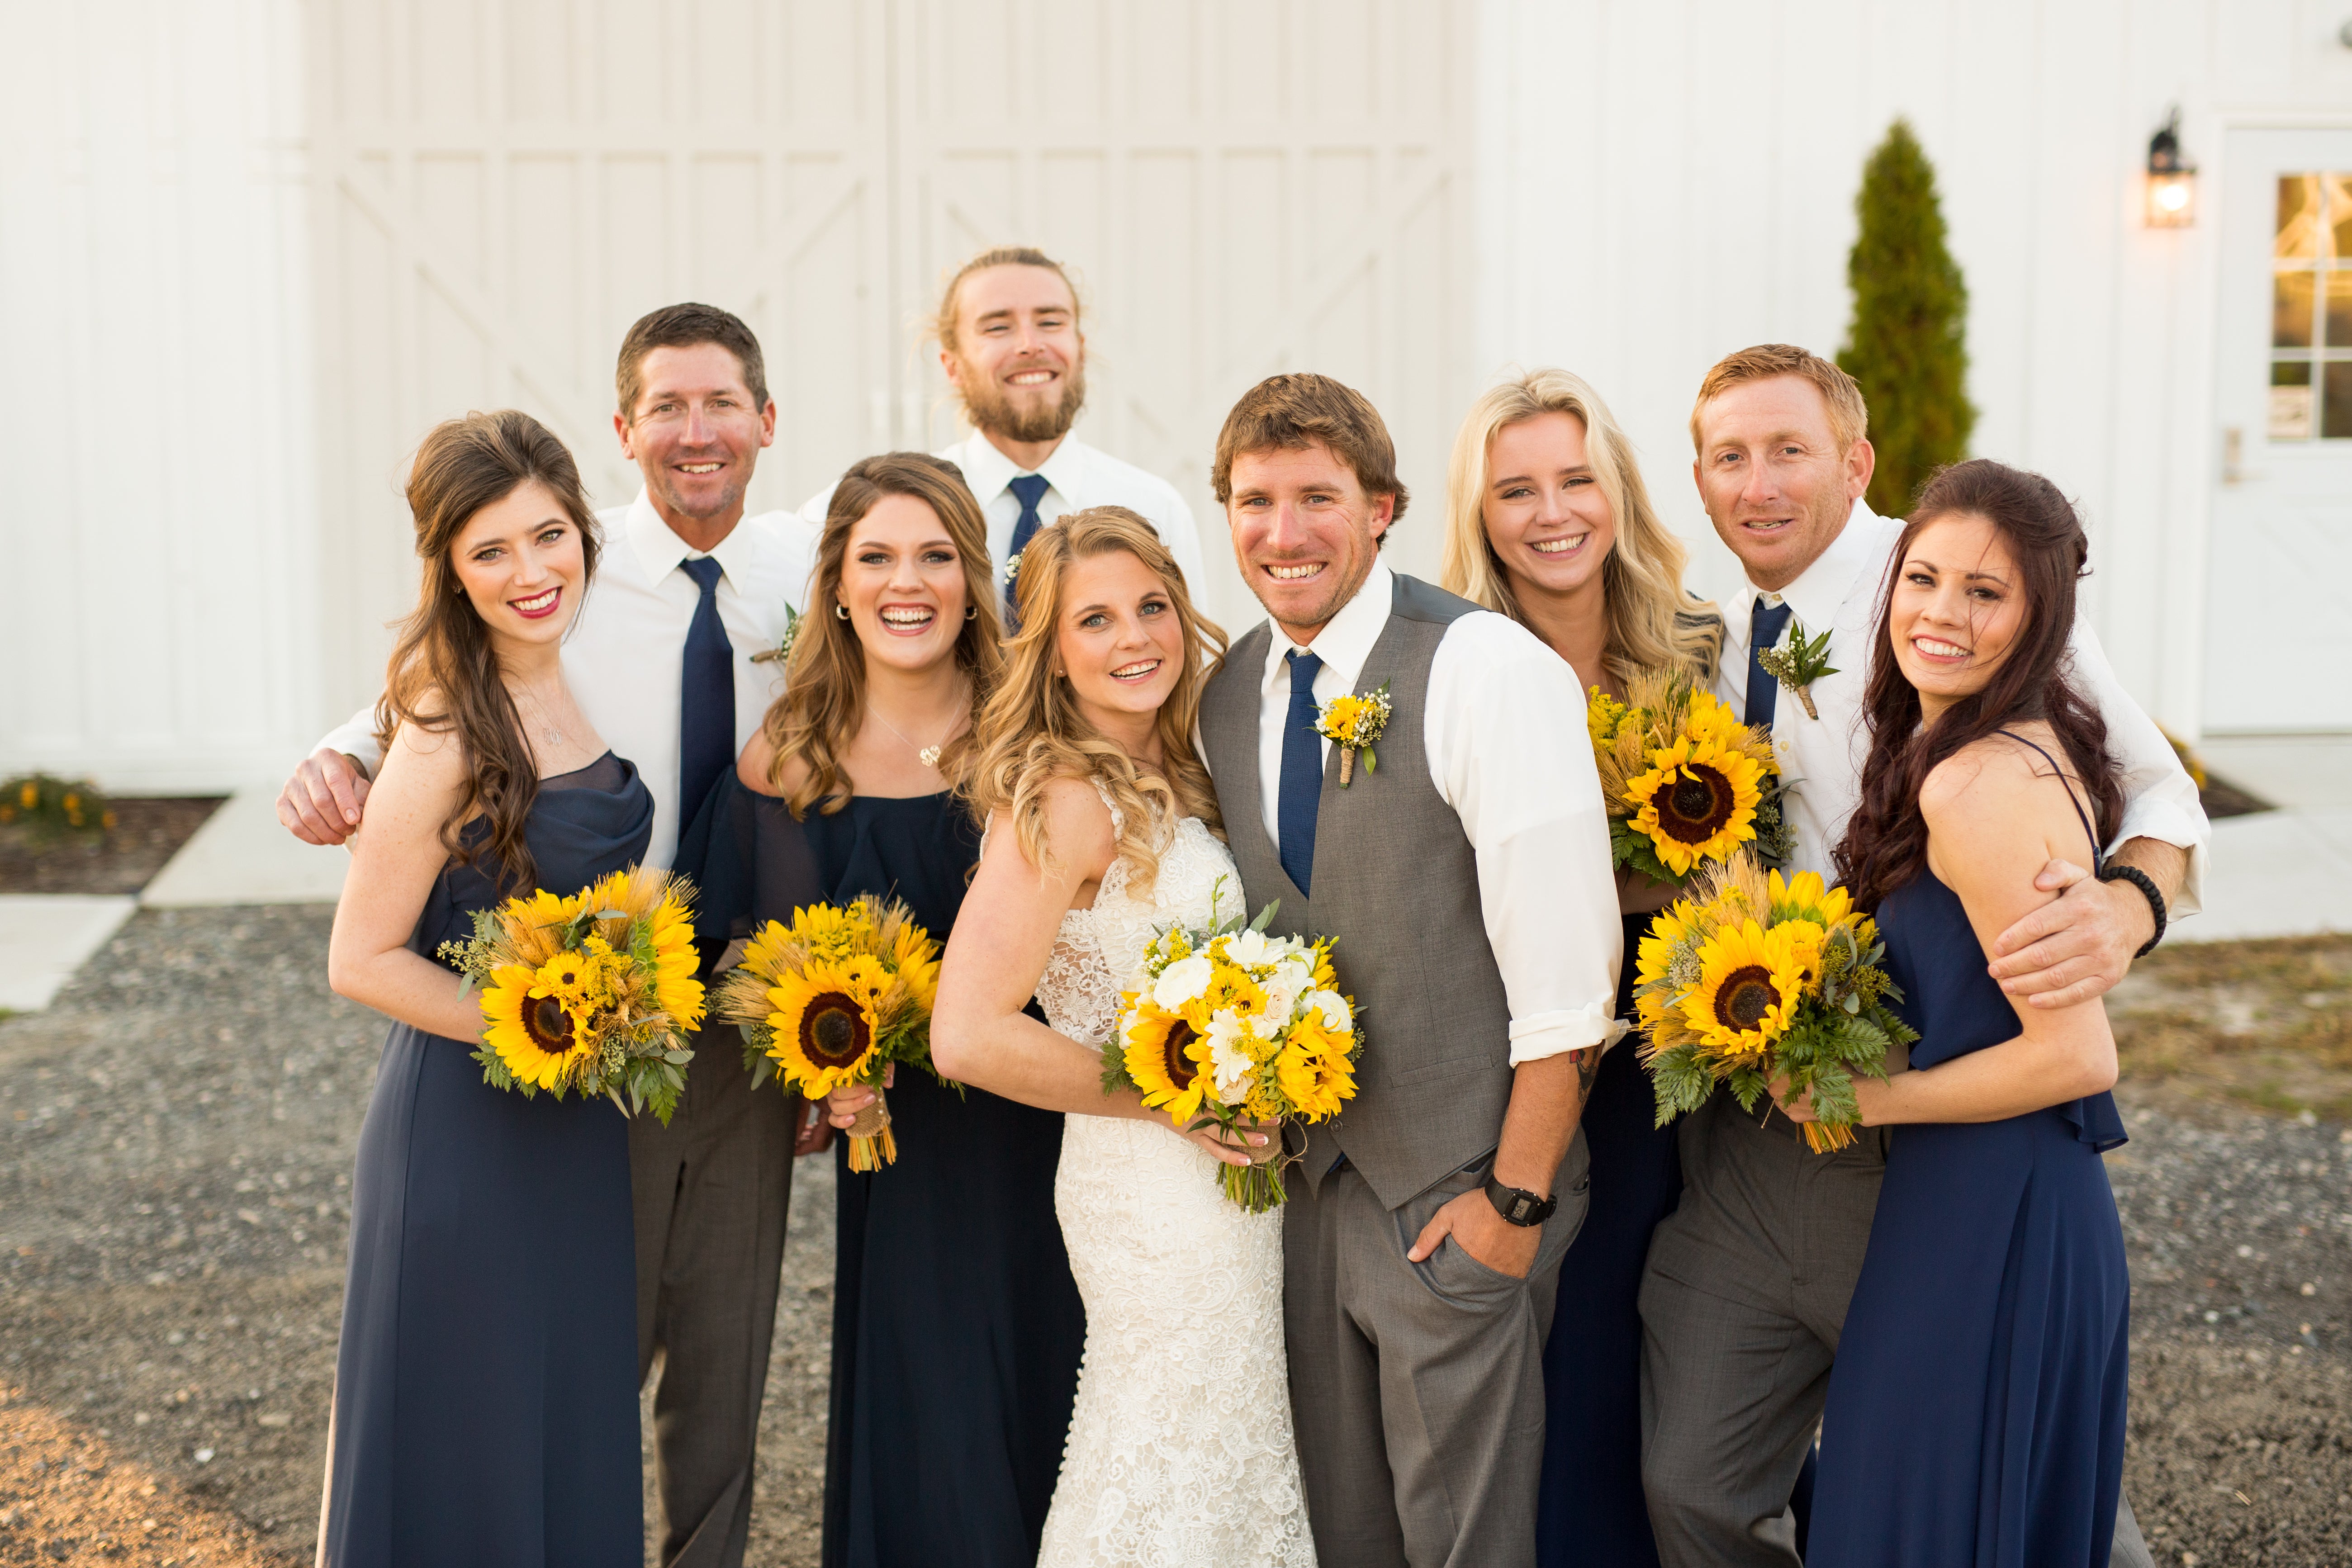 little miss lovely floral design // kylan barn delmar md wedding // rustic sunflower and white rose bouquets wedding flowers